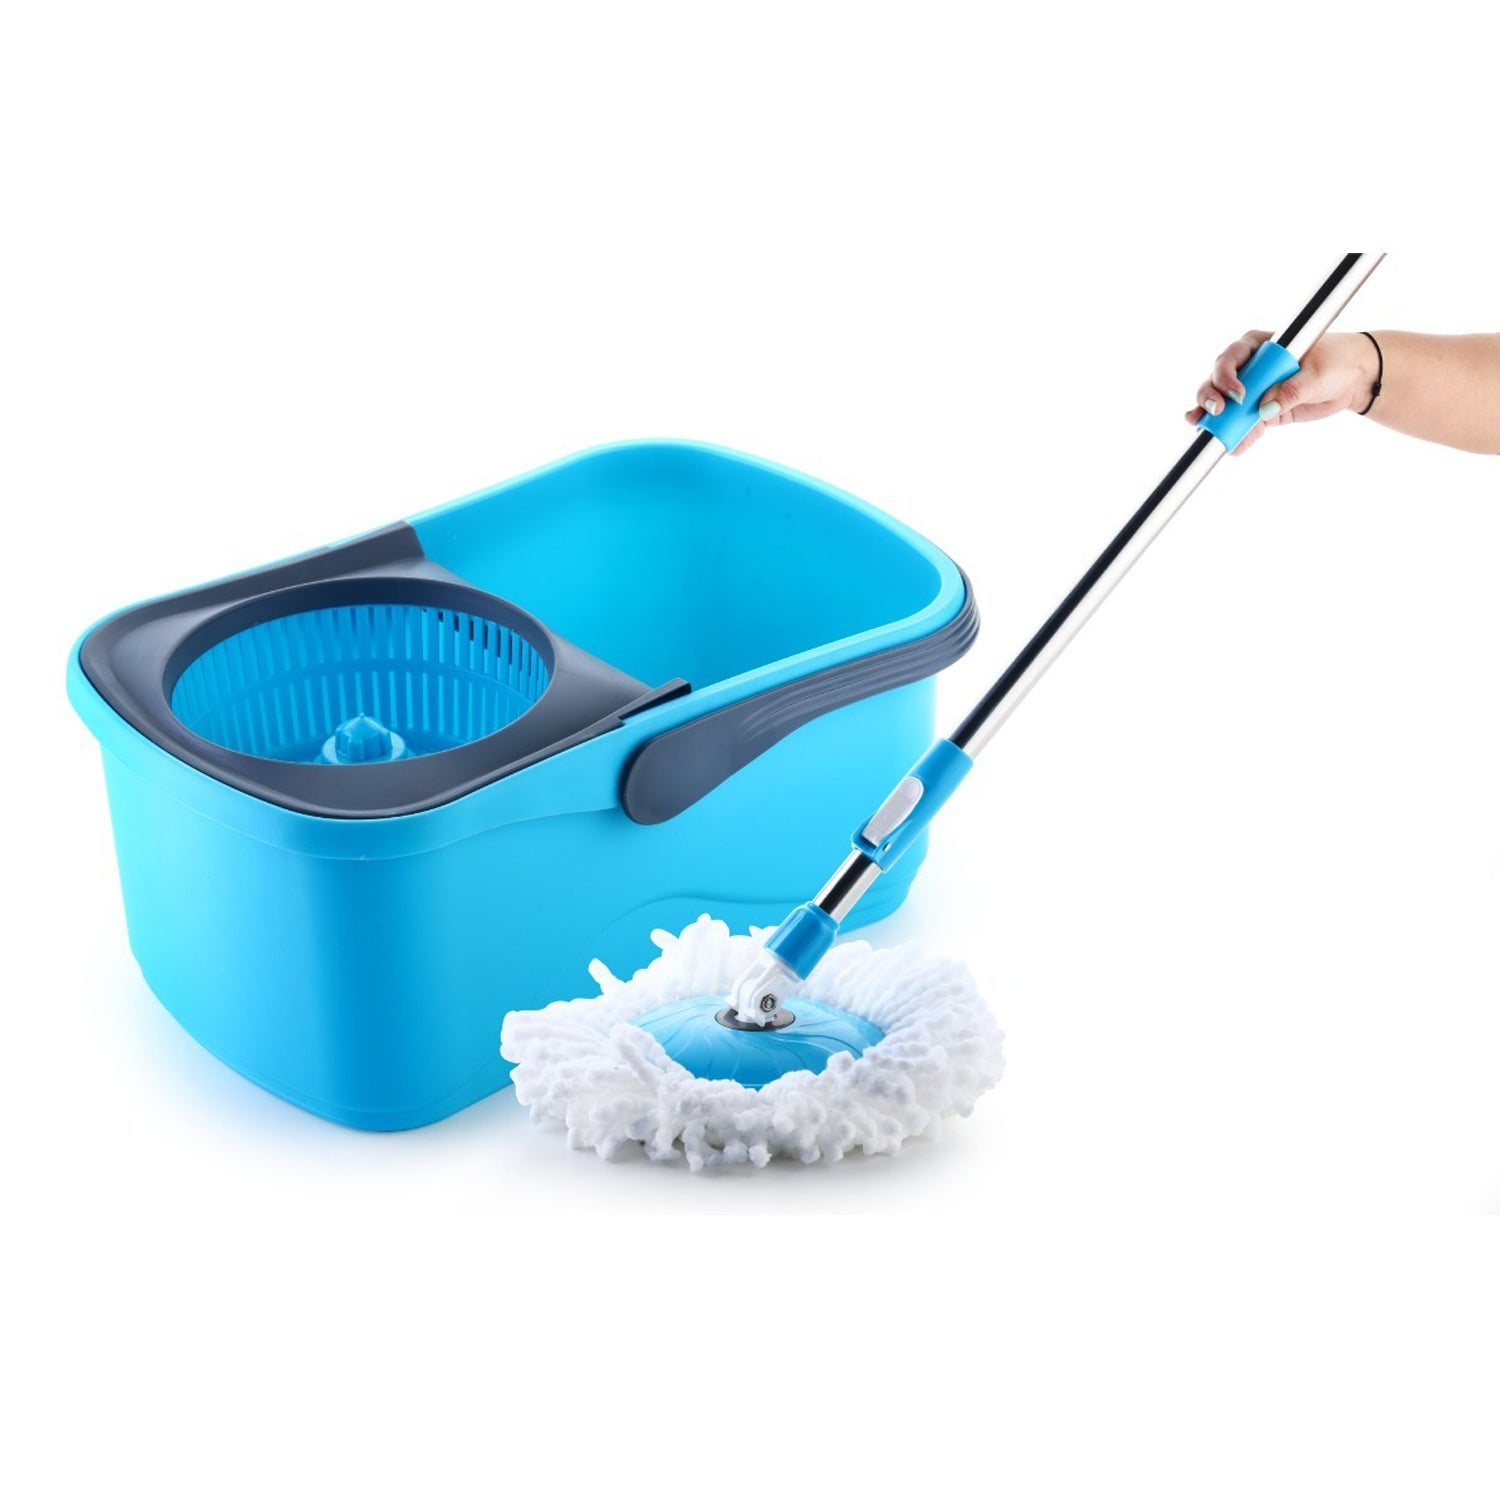 4798 Plastic Jali Bucket Mop used in all kinds of household and official bathroom purposes for cleaning and washing floors and surfaces. freeshipping - DeoDap